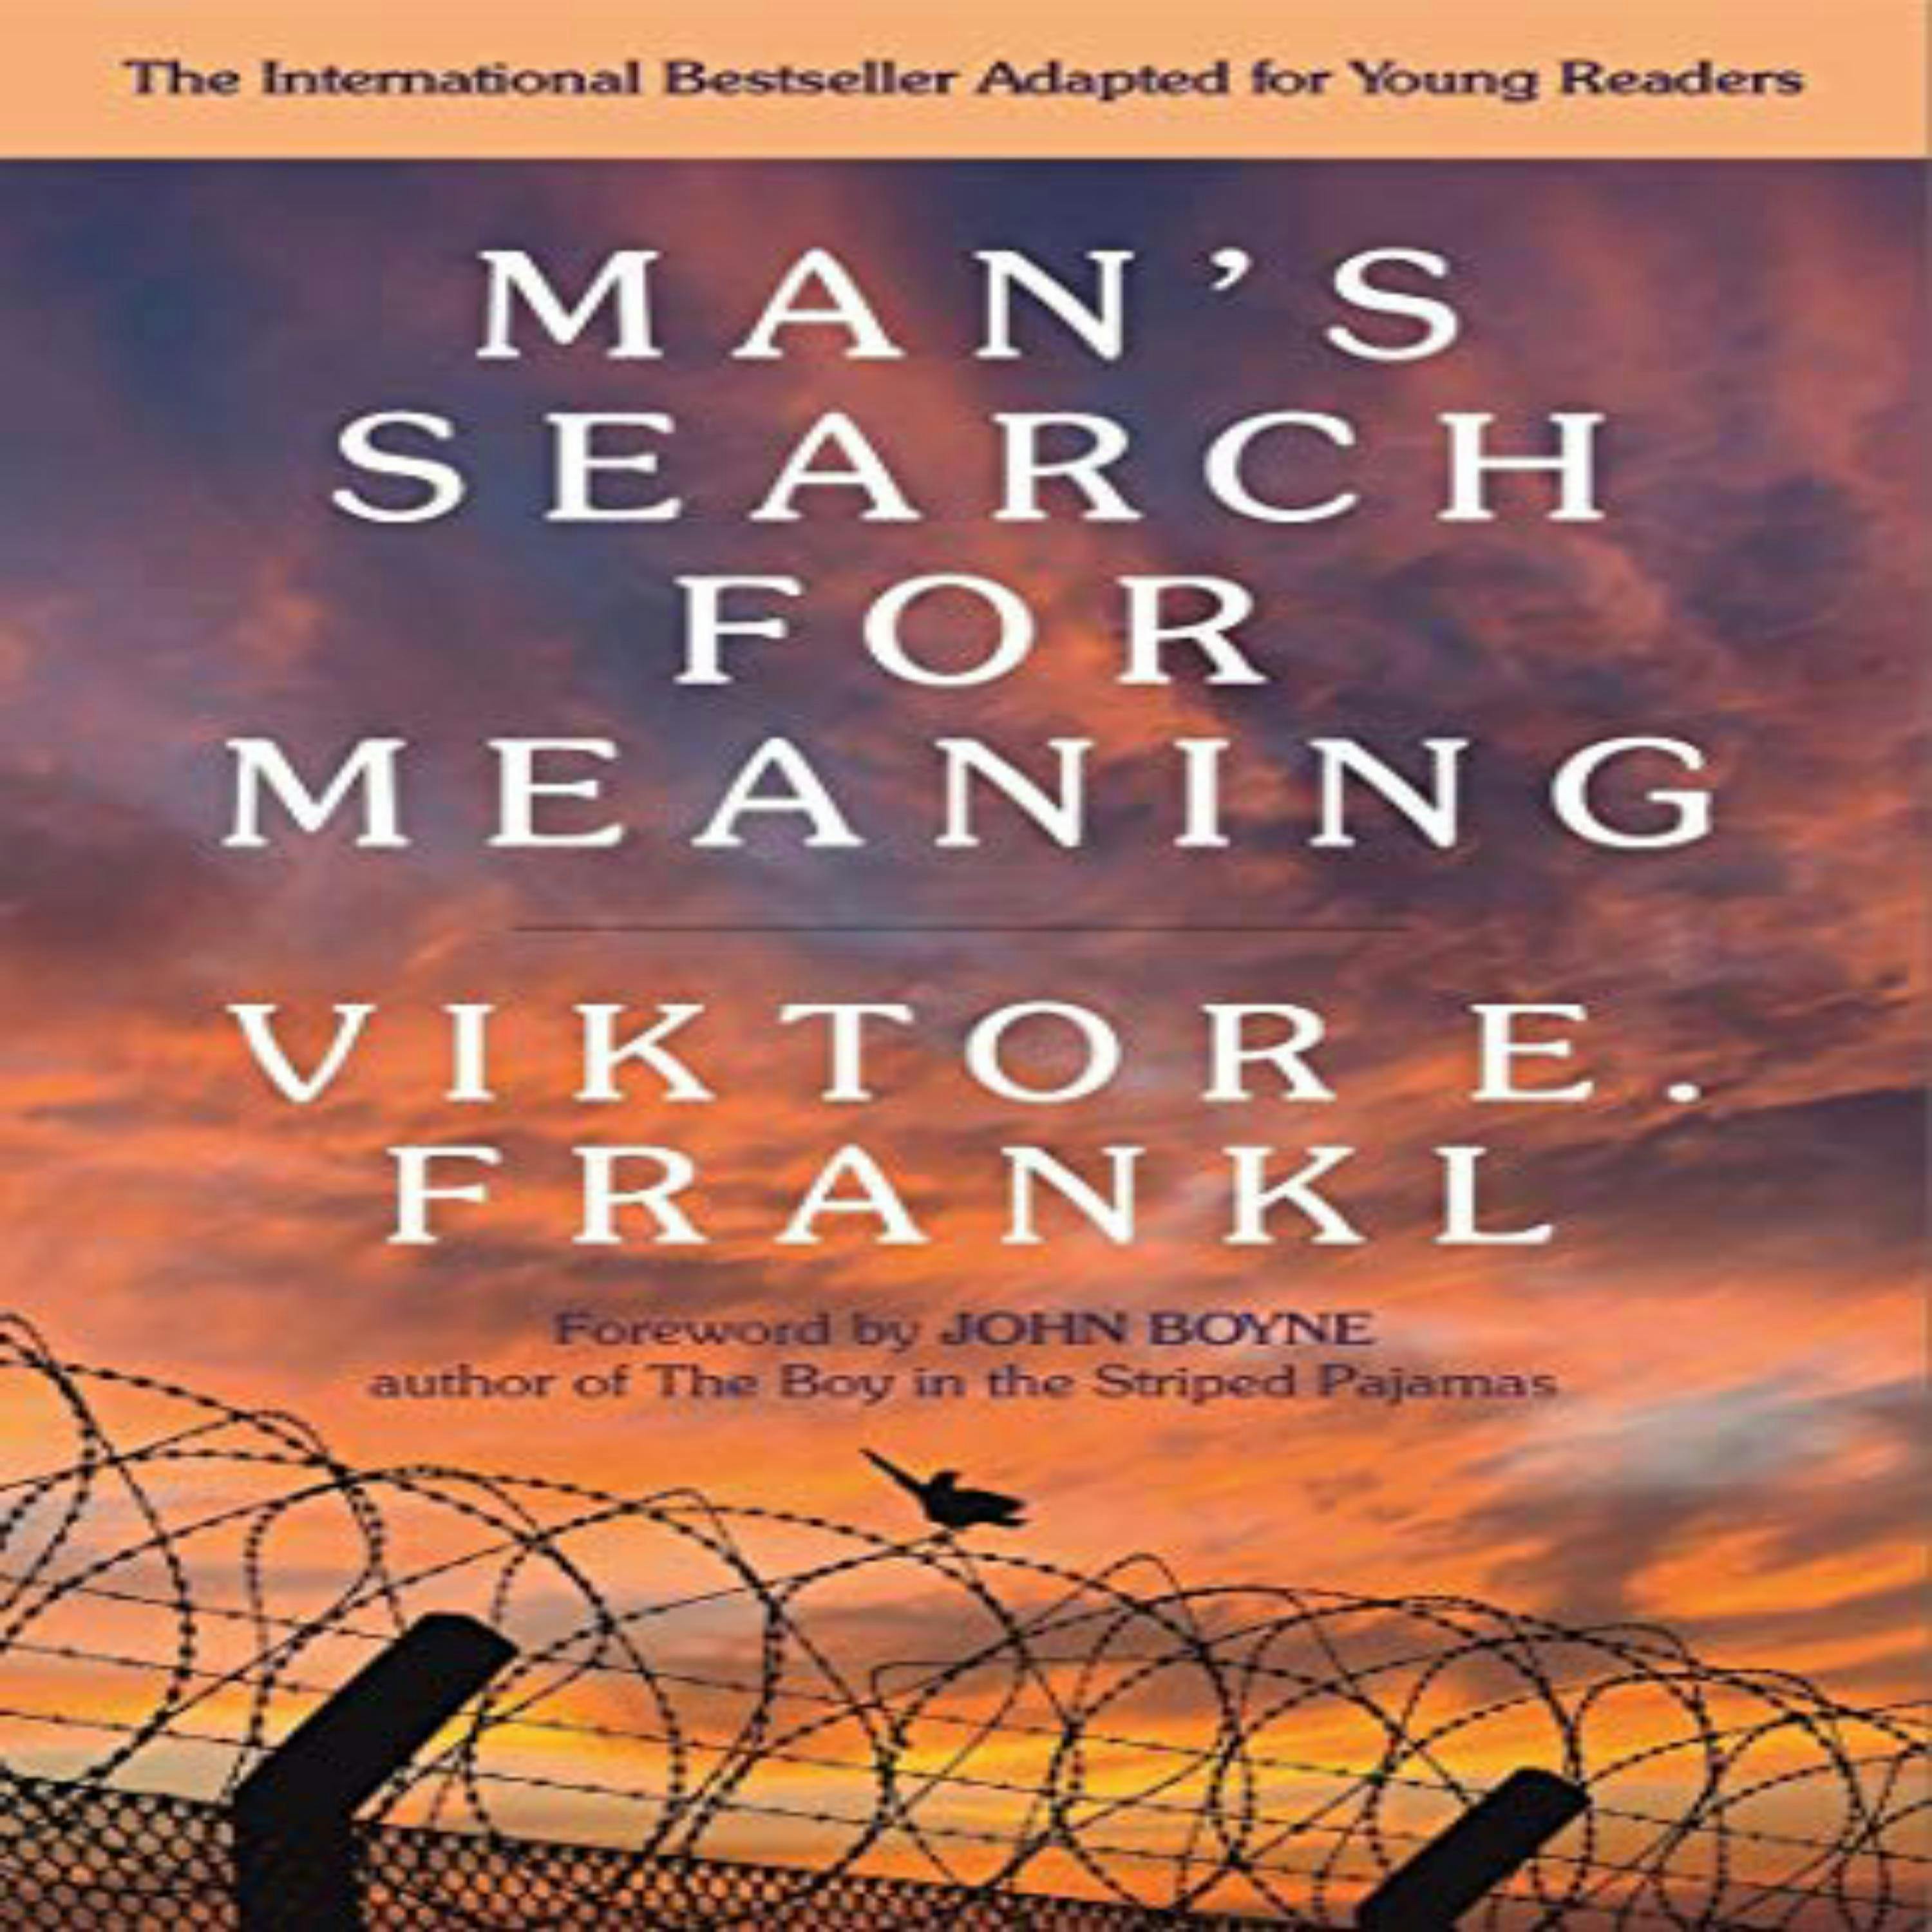 Man's Search For Meaning: Young Adult Edition - Viktor E. Frankl